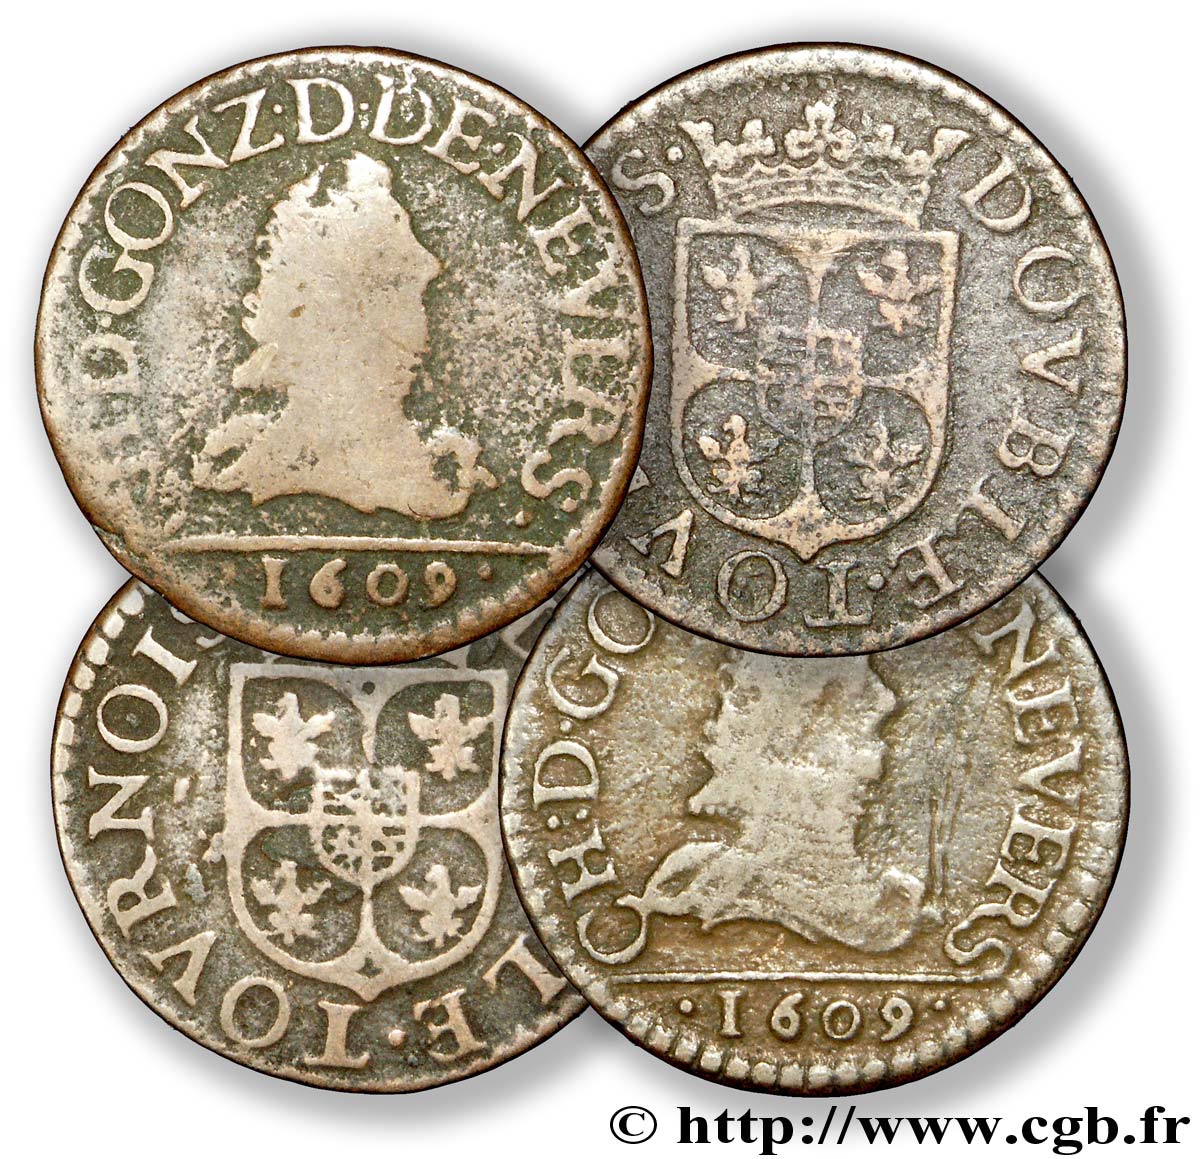 ARDENNES - PRINCIPALITY OF ARCHES-CHARLEVILLE - CHARLES I GONZAGA Lot de 4 doubles tournois, type 3 XF/AU